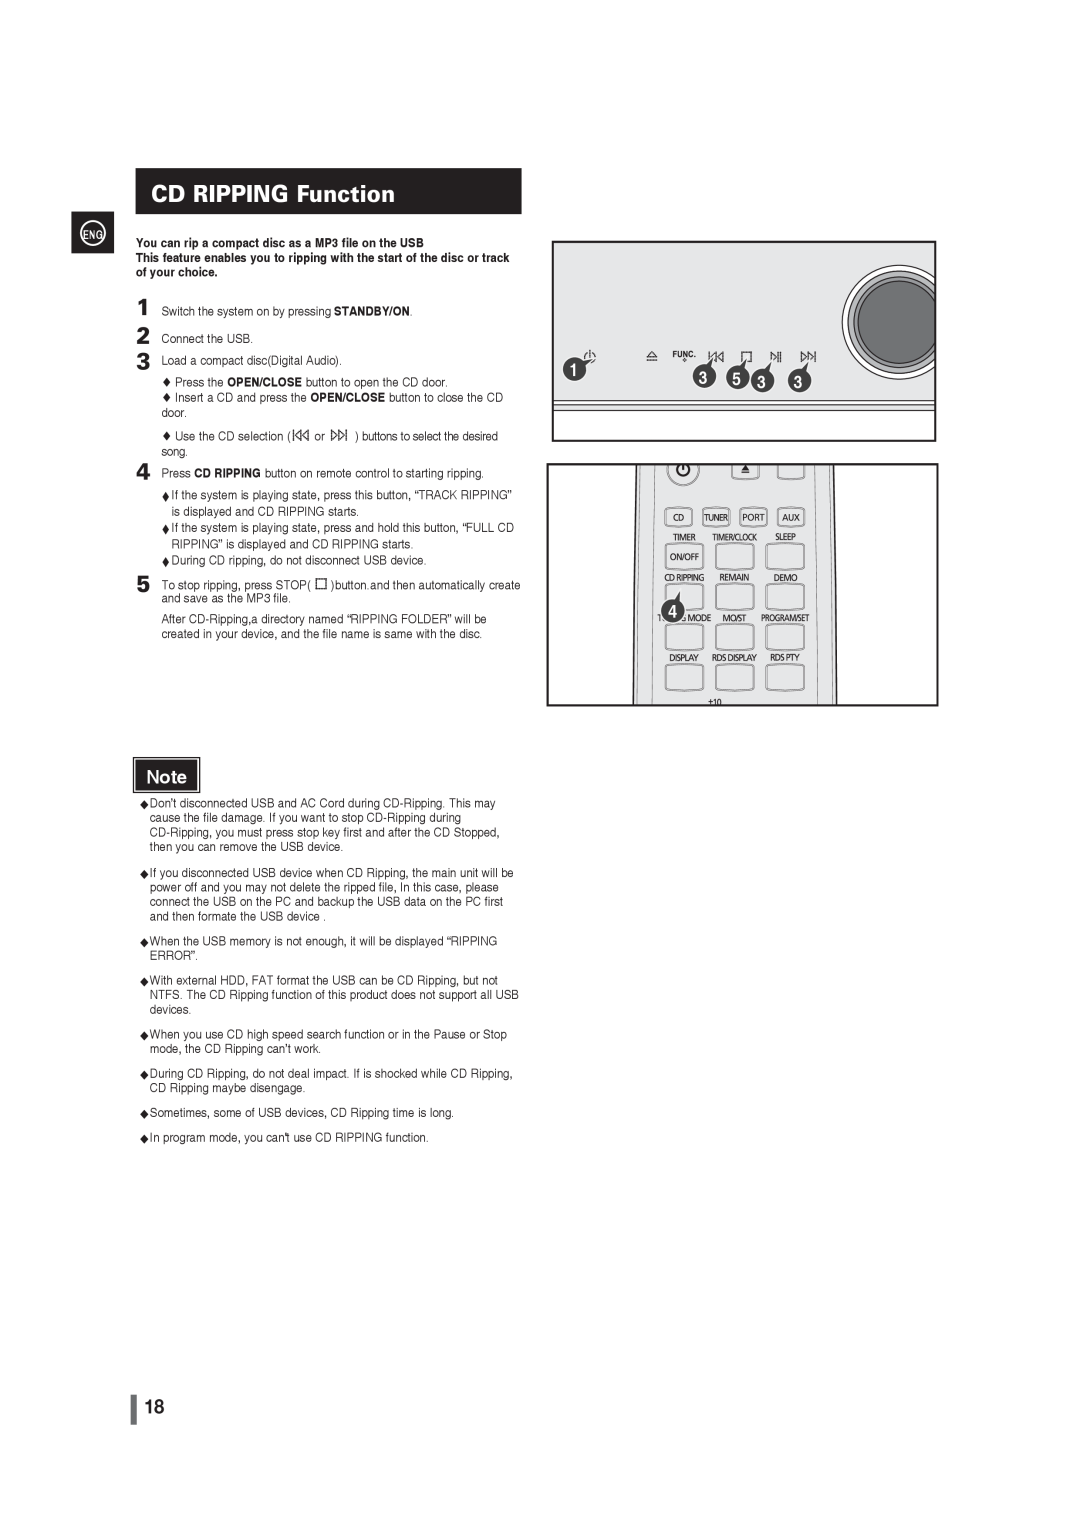 Samsung MM-G35 user manual CD RIPPING Function, of your choice 